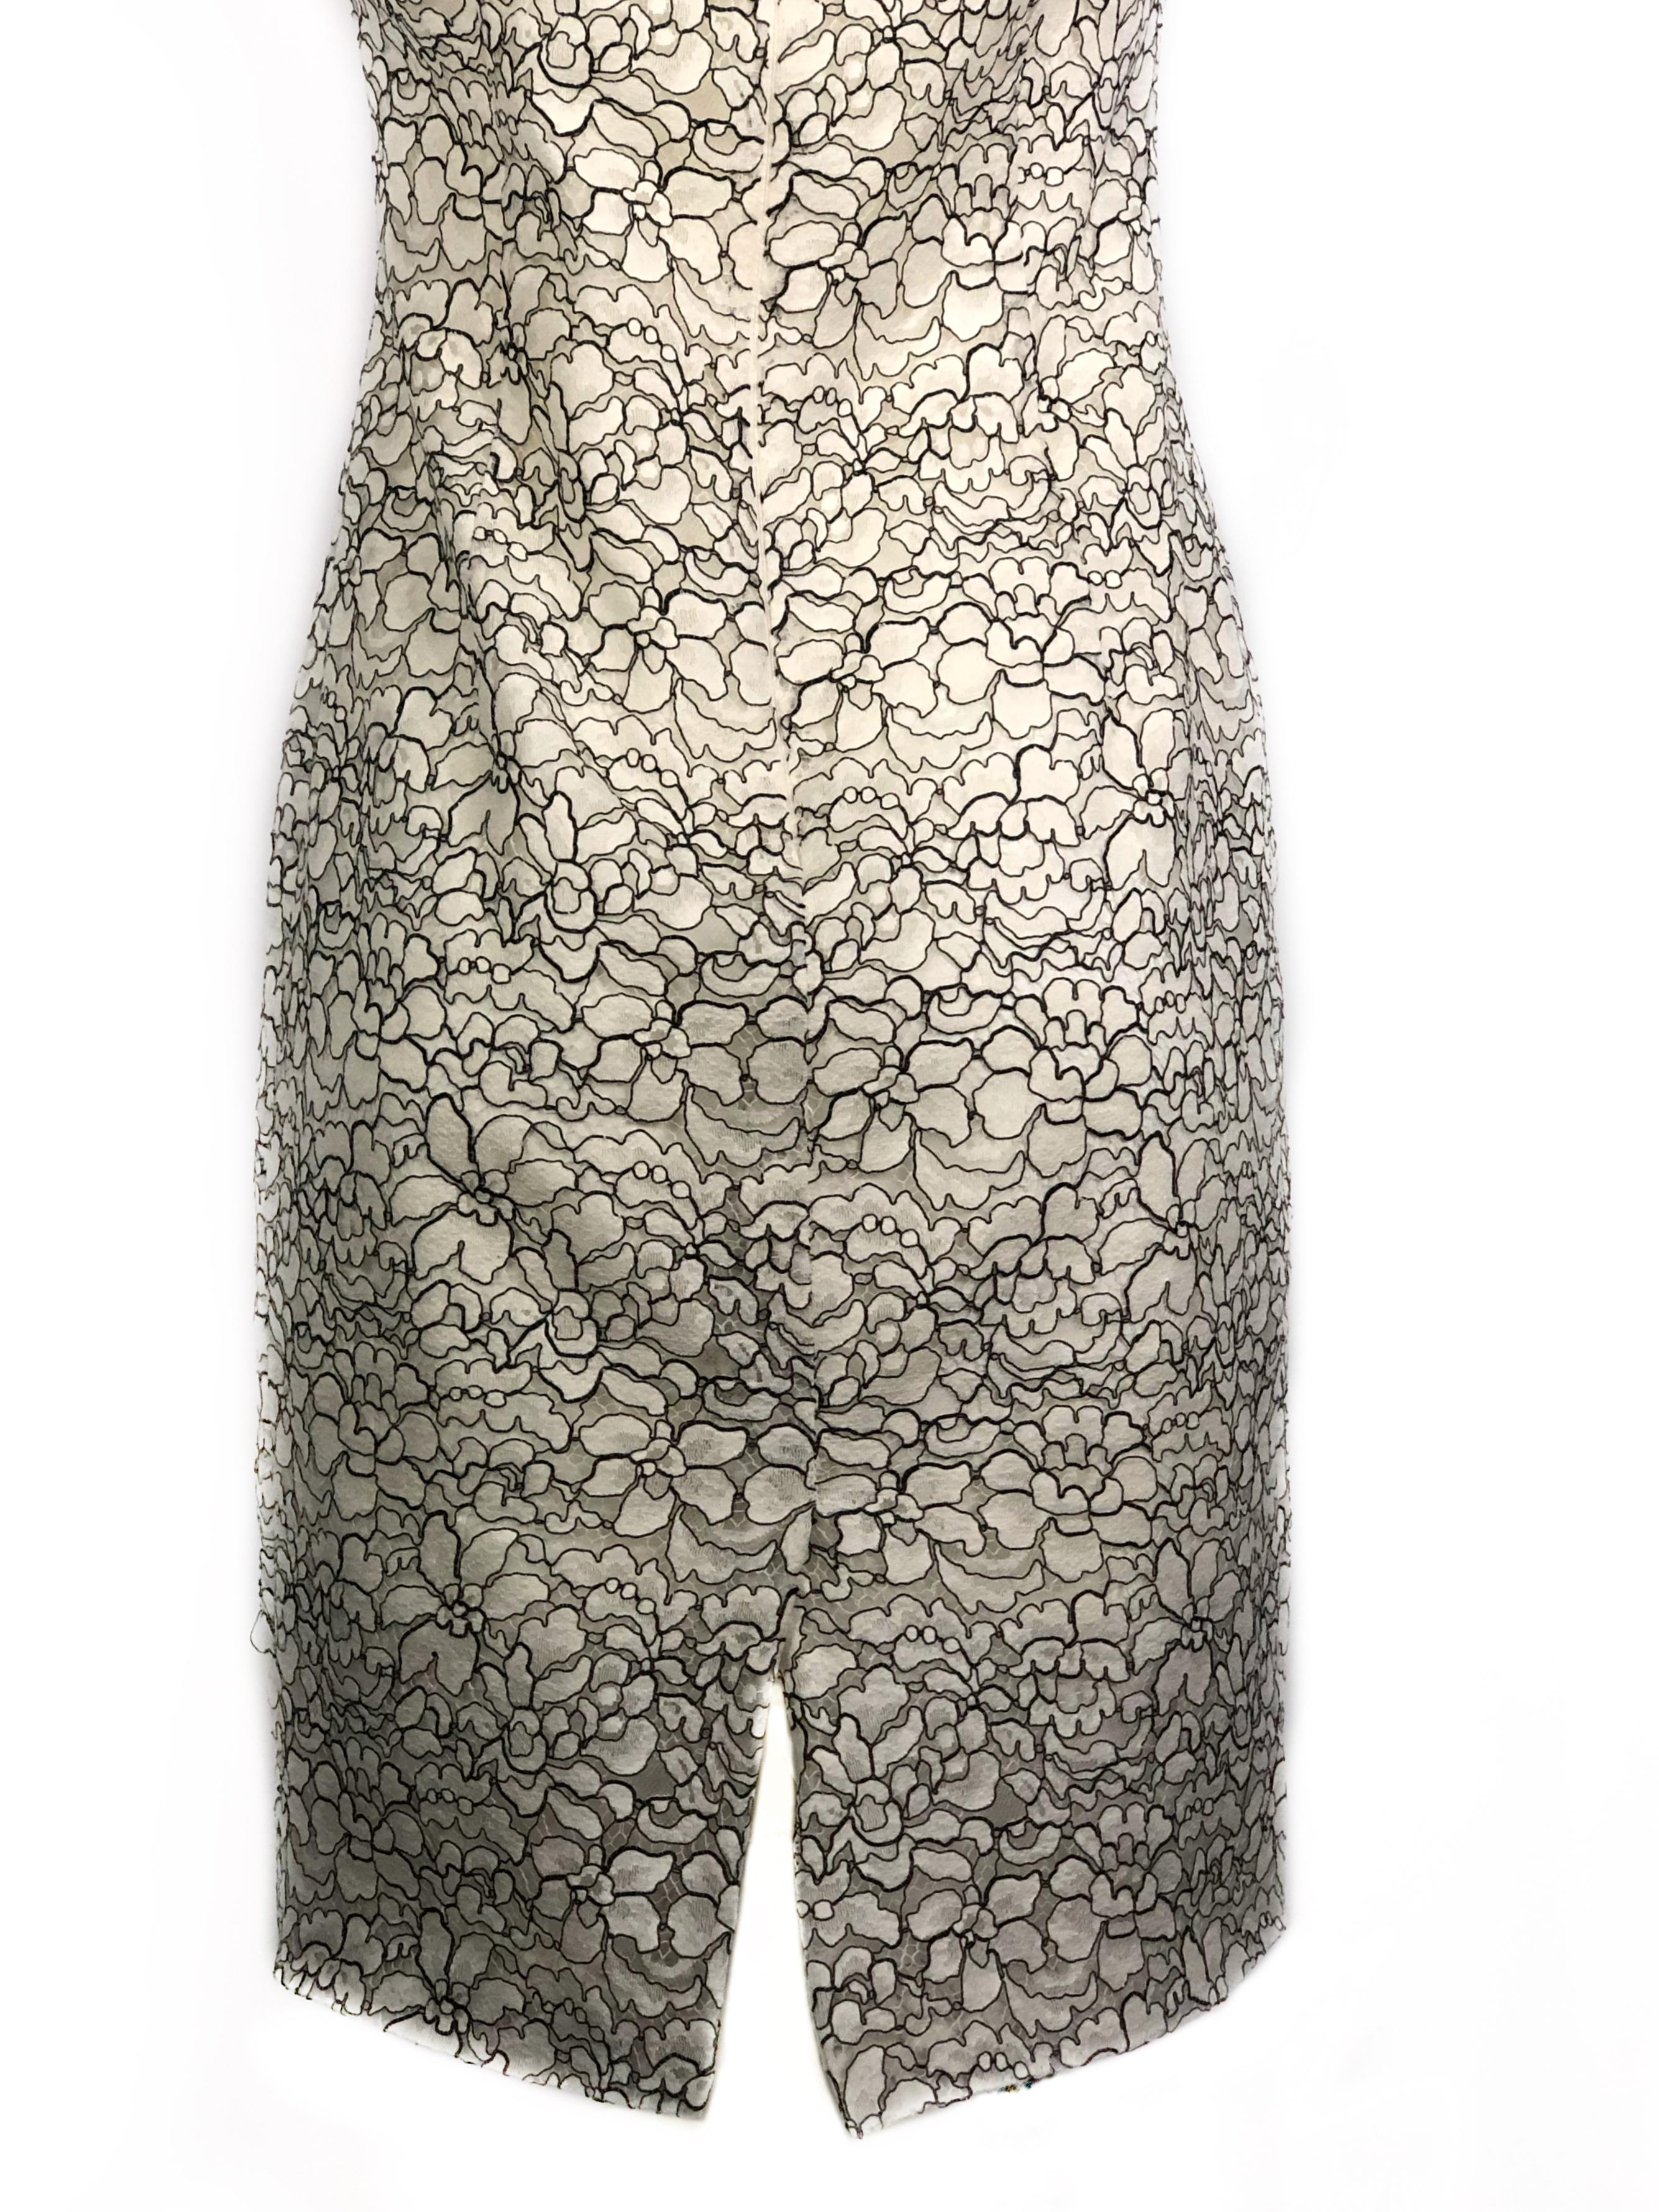 Brown Vintage CHRISTIAN DIOR White Floral Lace Dress Size 8 For Sale